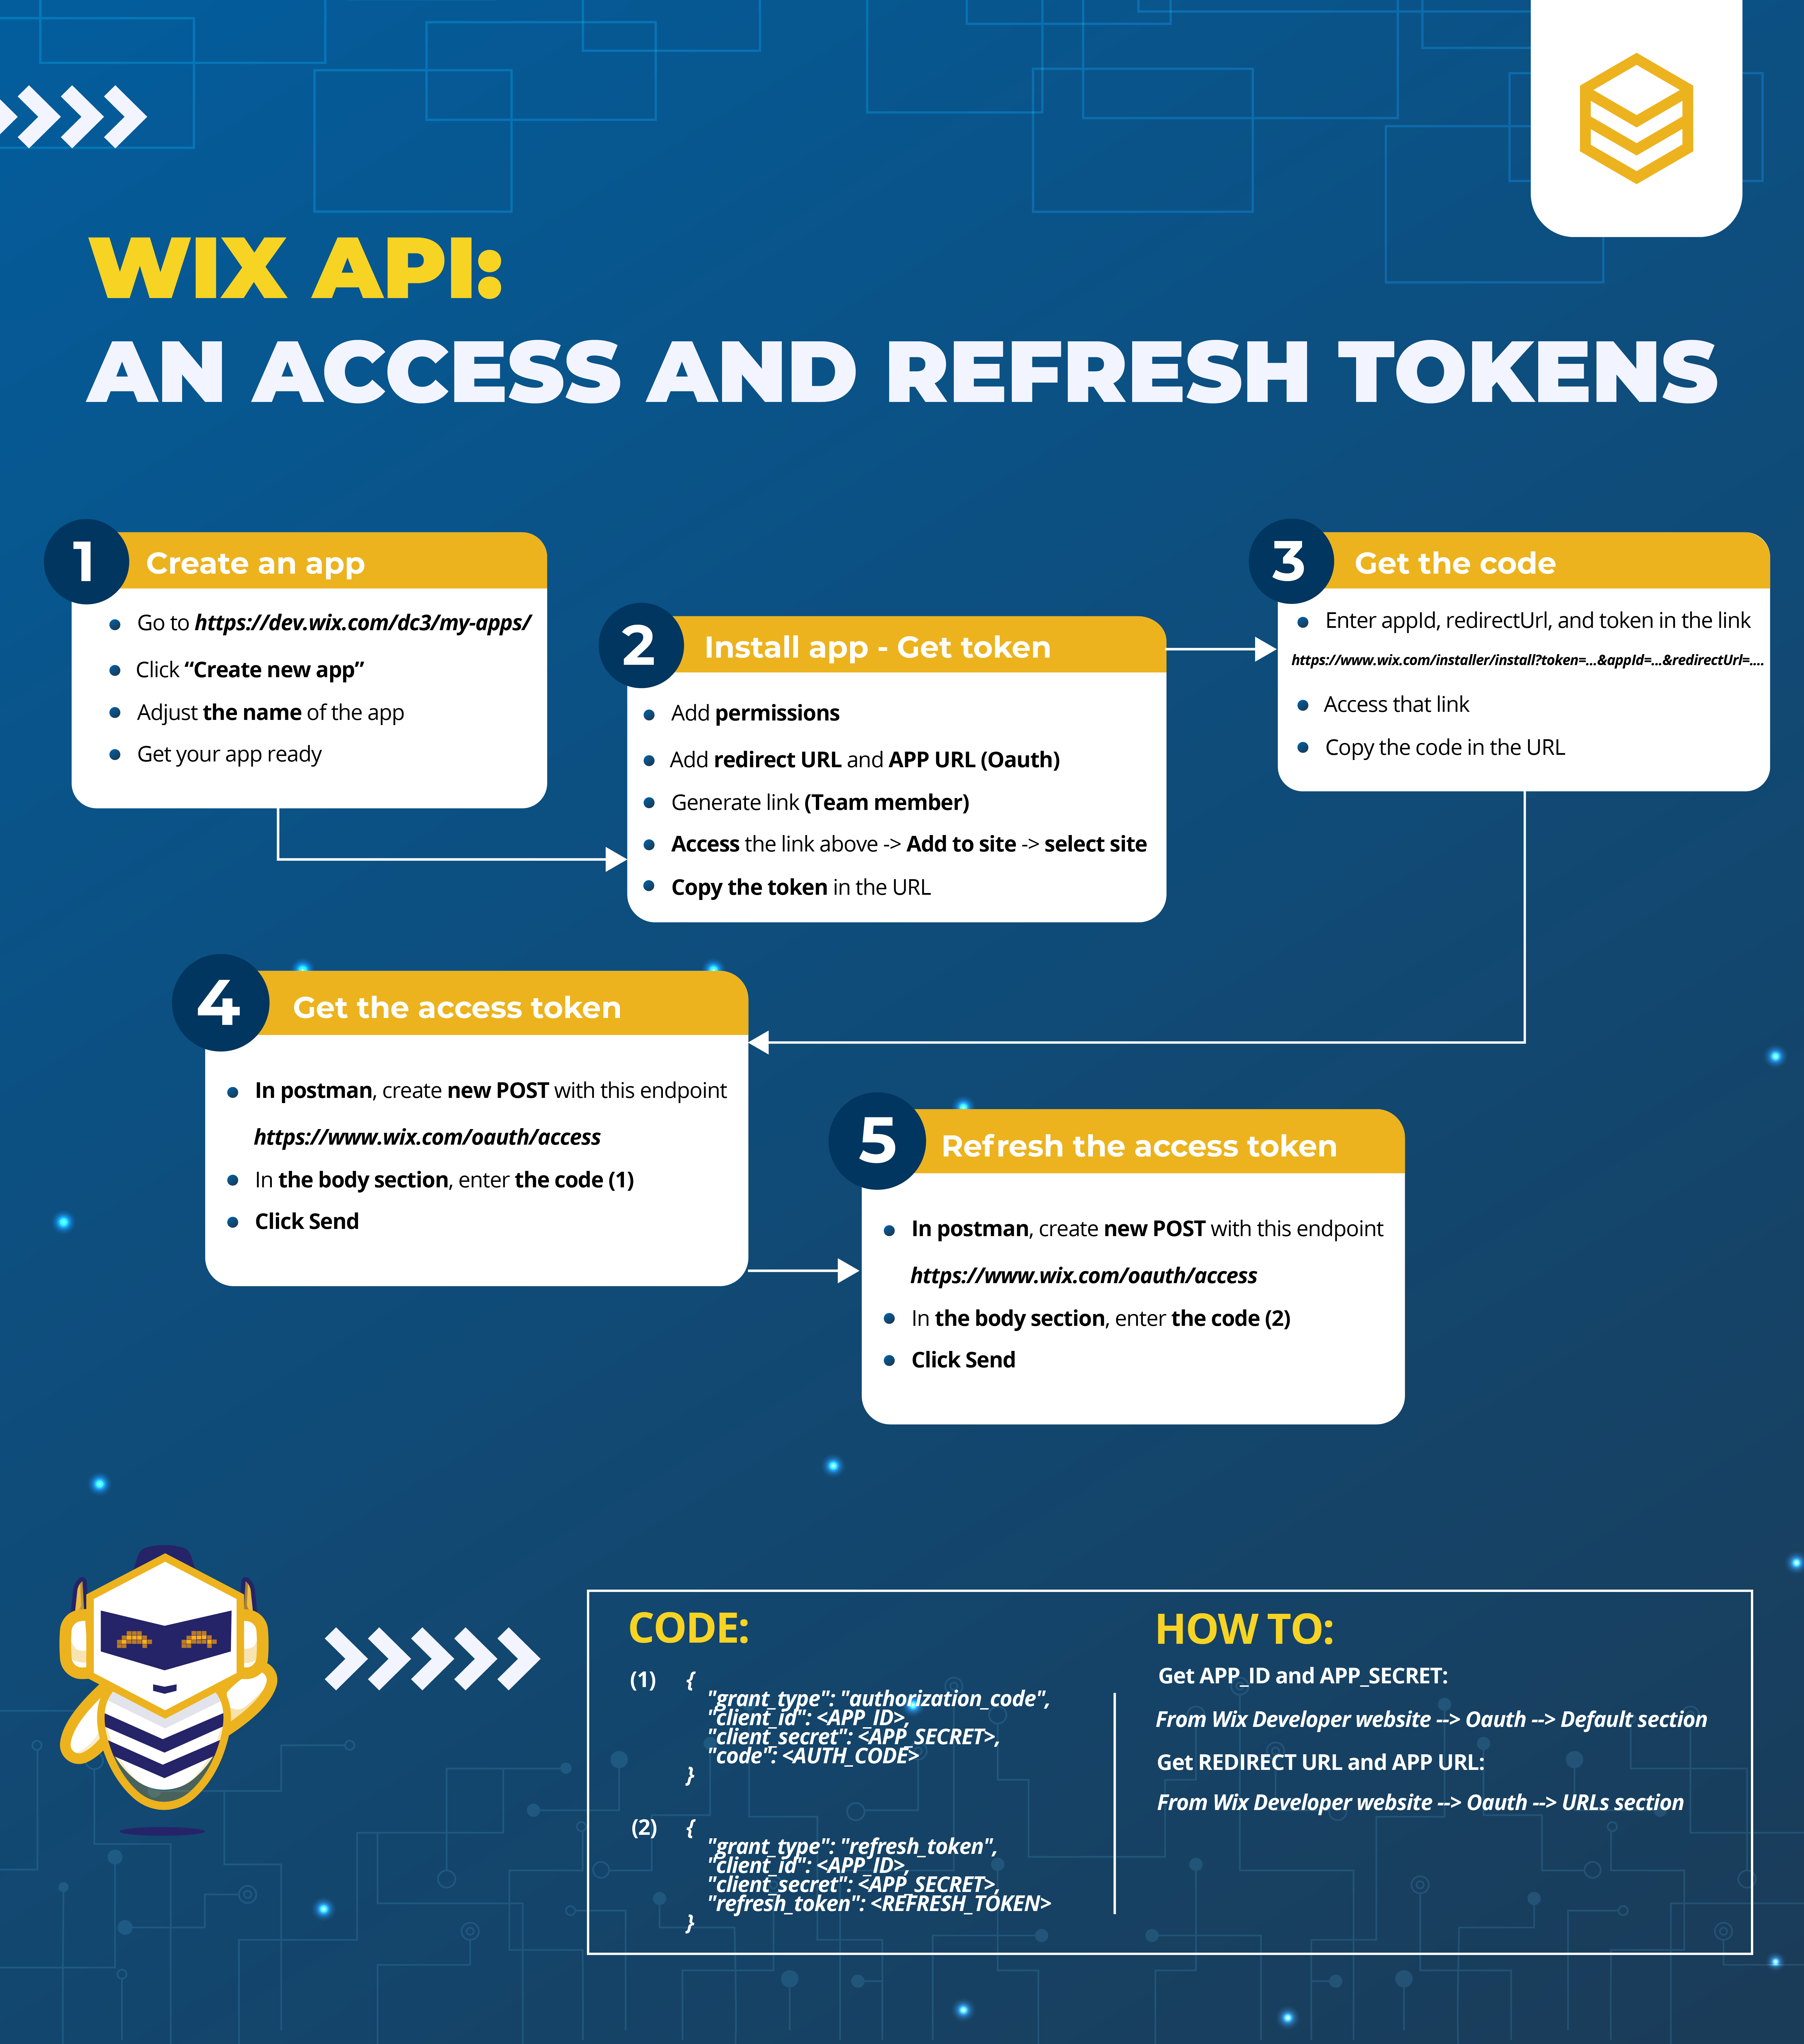 Wix API: How to get an access token and refresh the access token?
